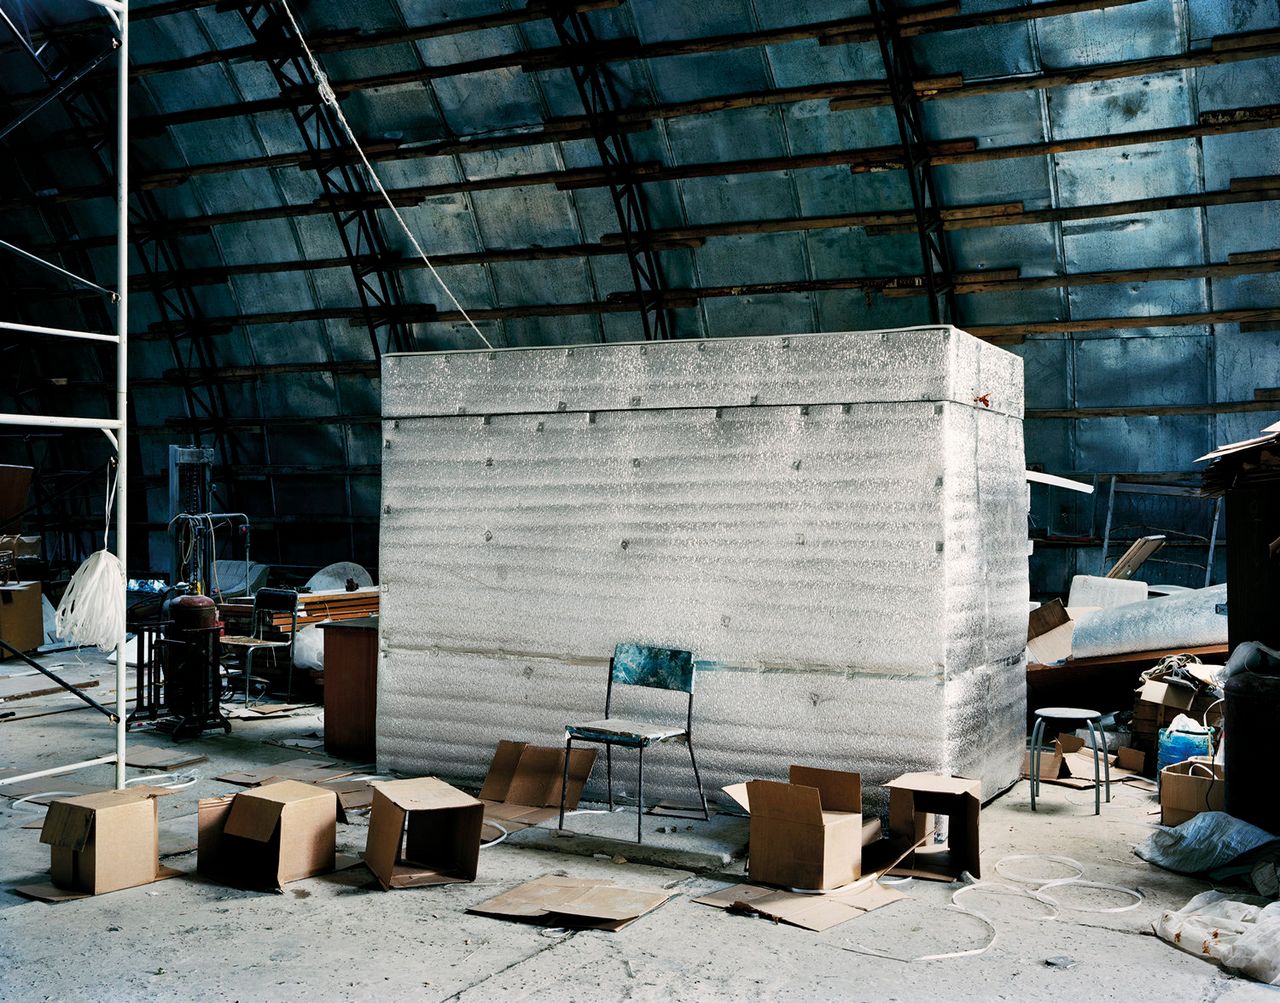 Temporary storage container, KrioRus facility, Alabushevo, Moscow. September 2010. From The Prospect of Immortality by Murray Ballard, published by GOST, April 2016.